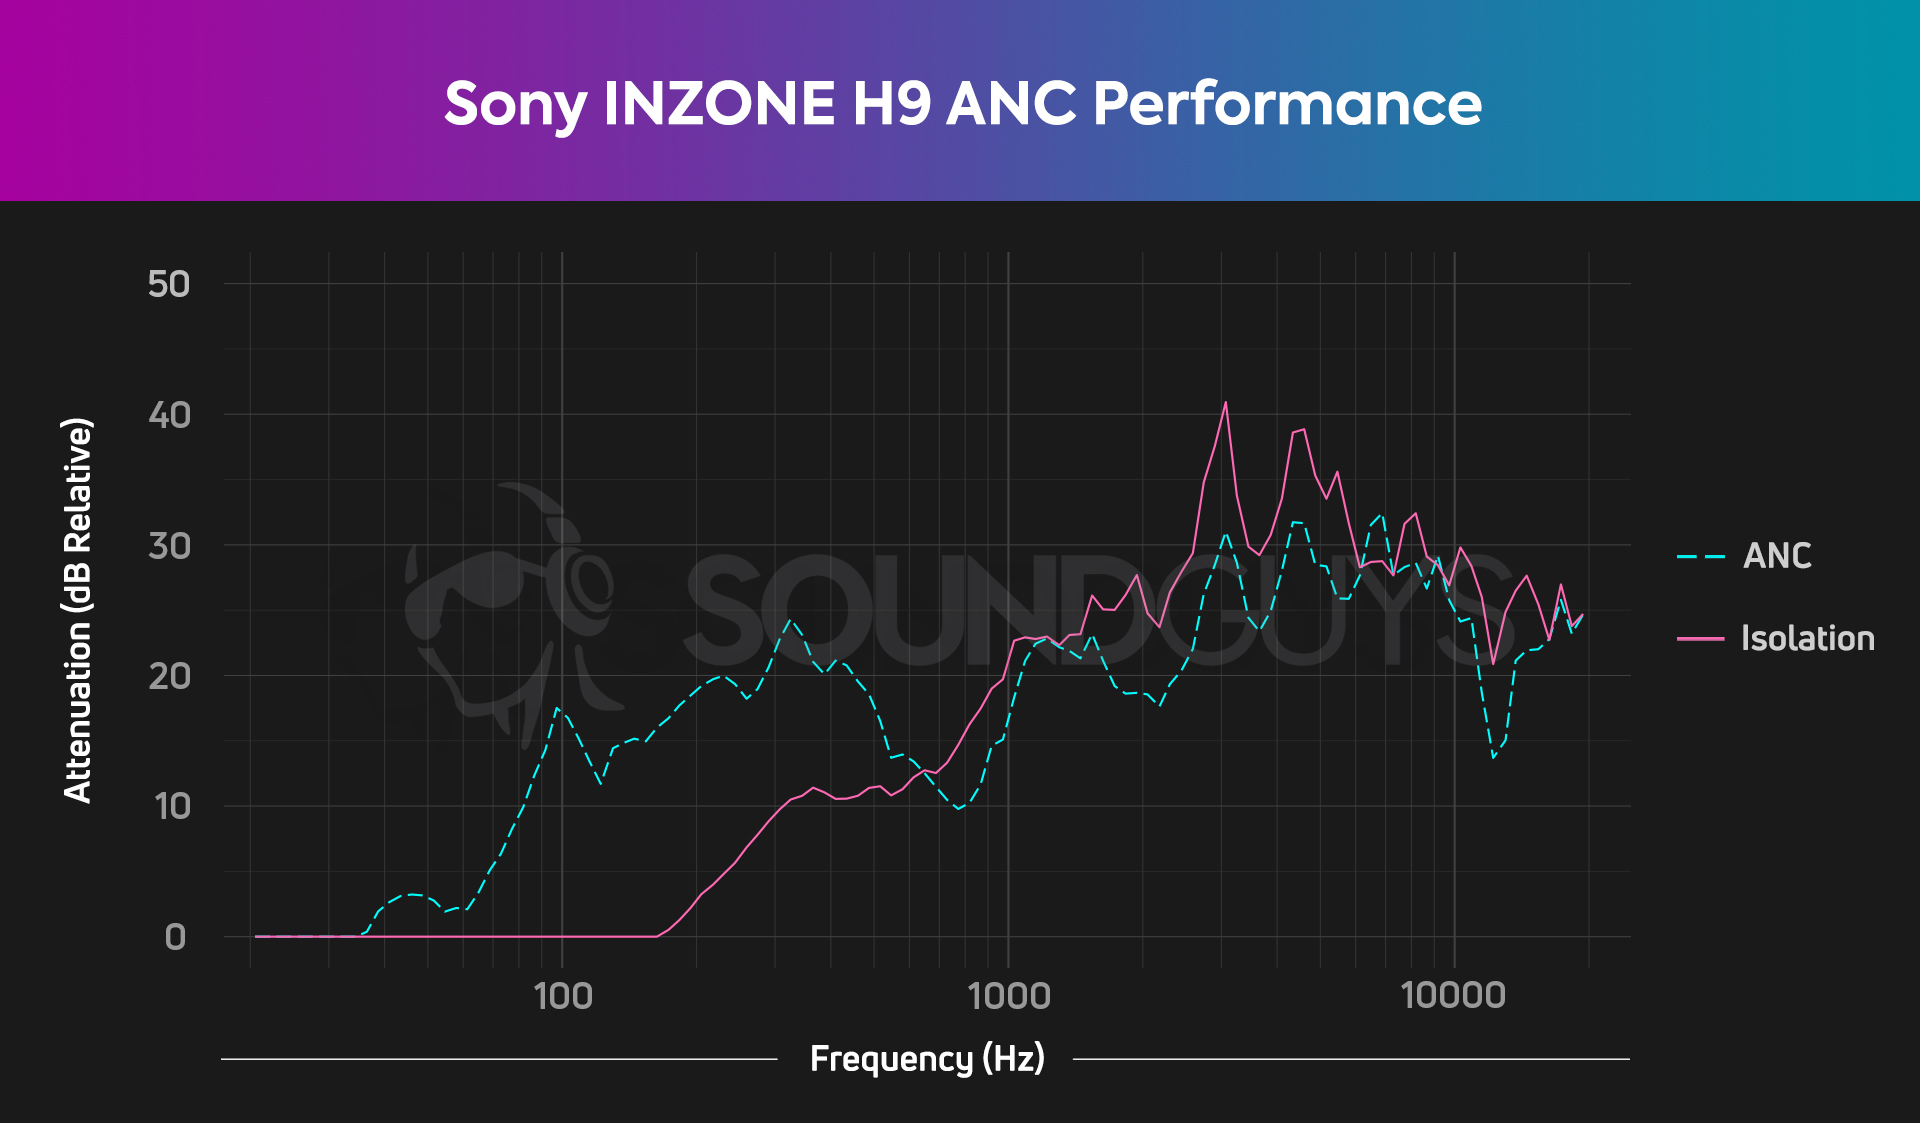 A noise canceling chart for the Sony INZONE H9 gaming headset, which shows decent noise canceling between 100Hz and 500Hz.